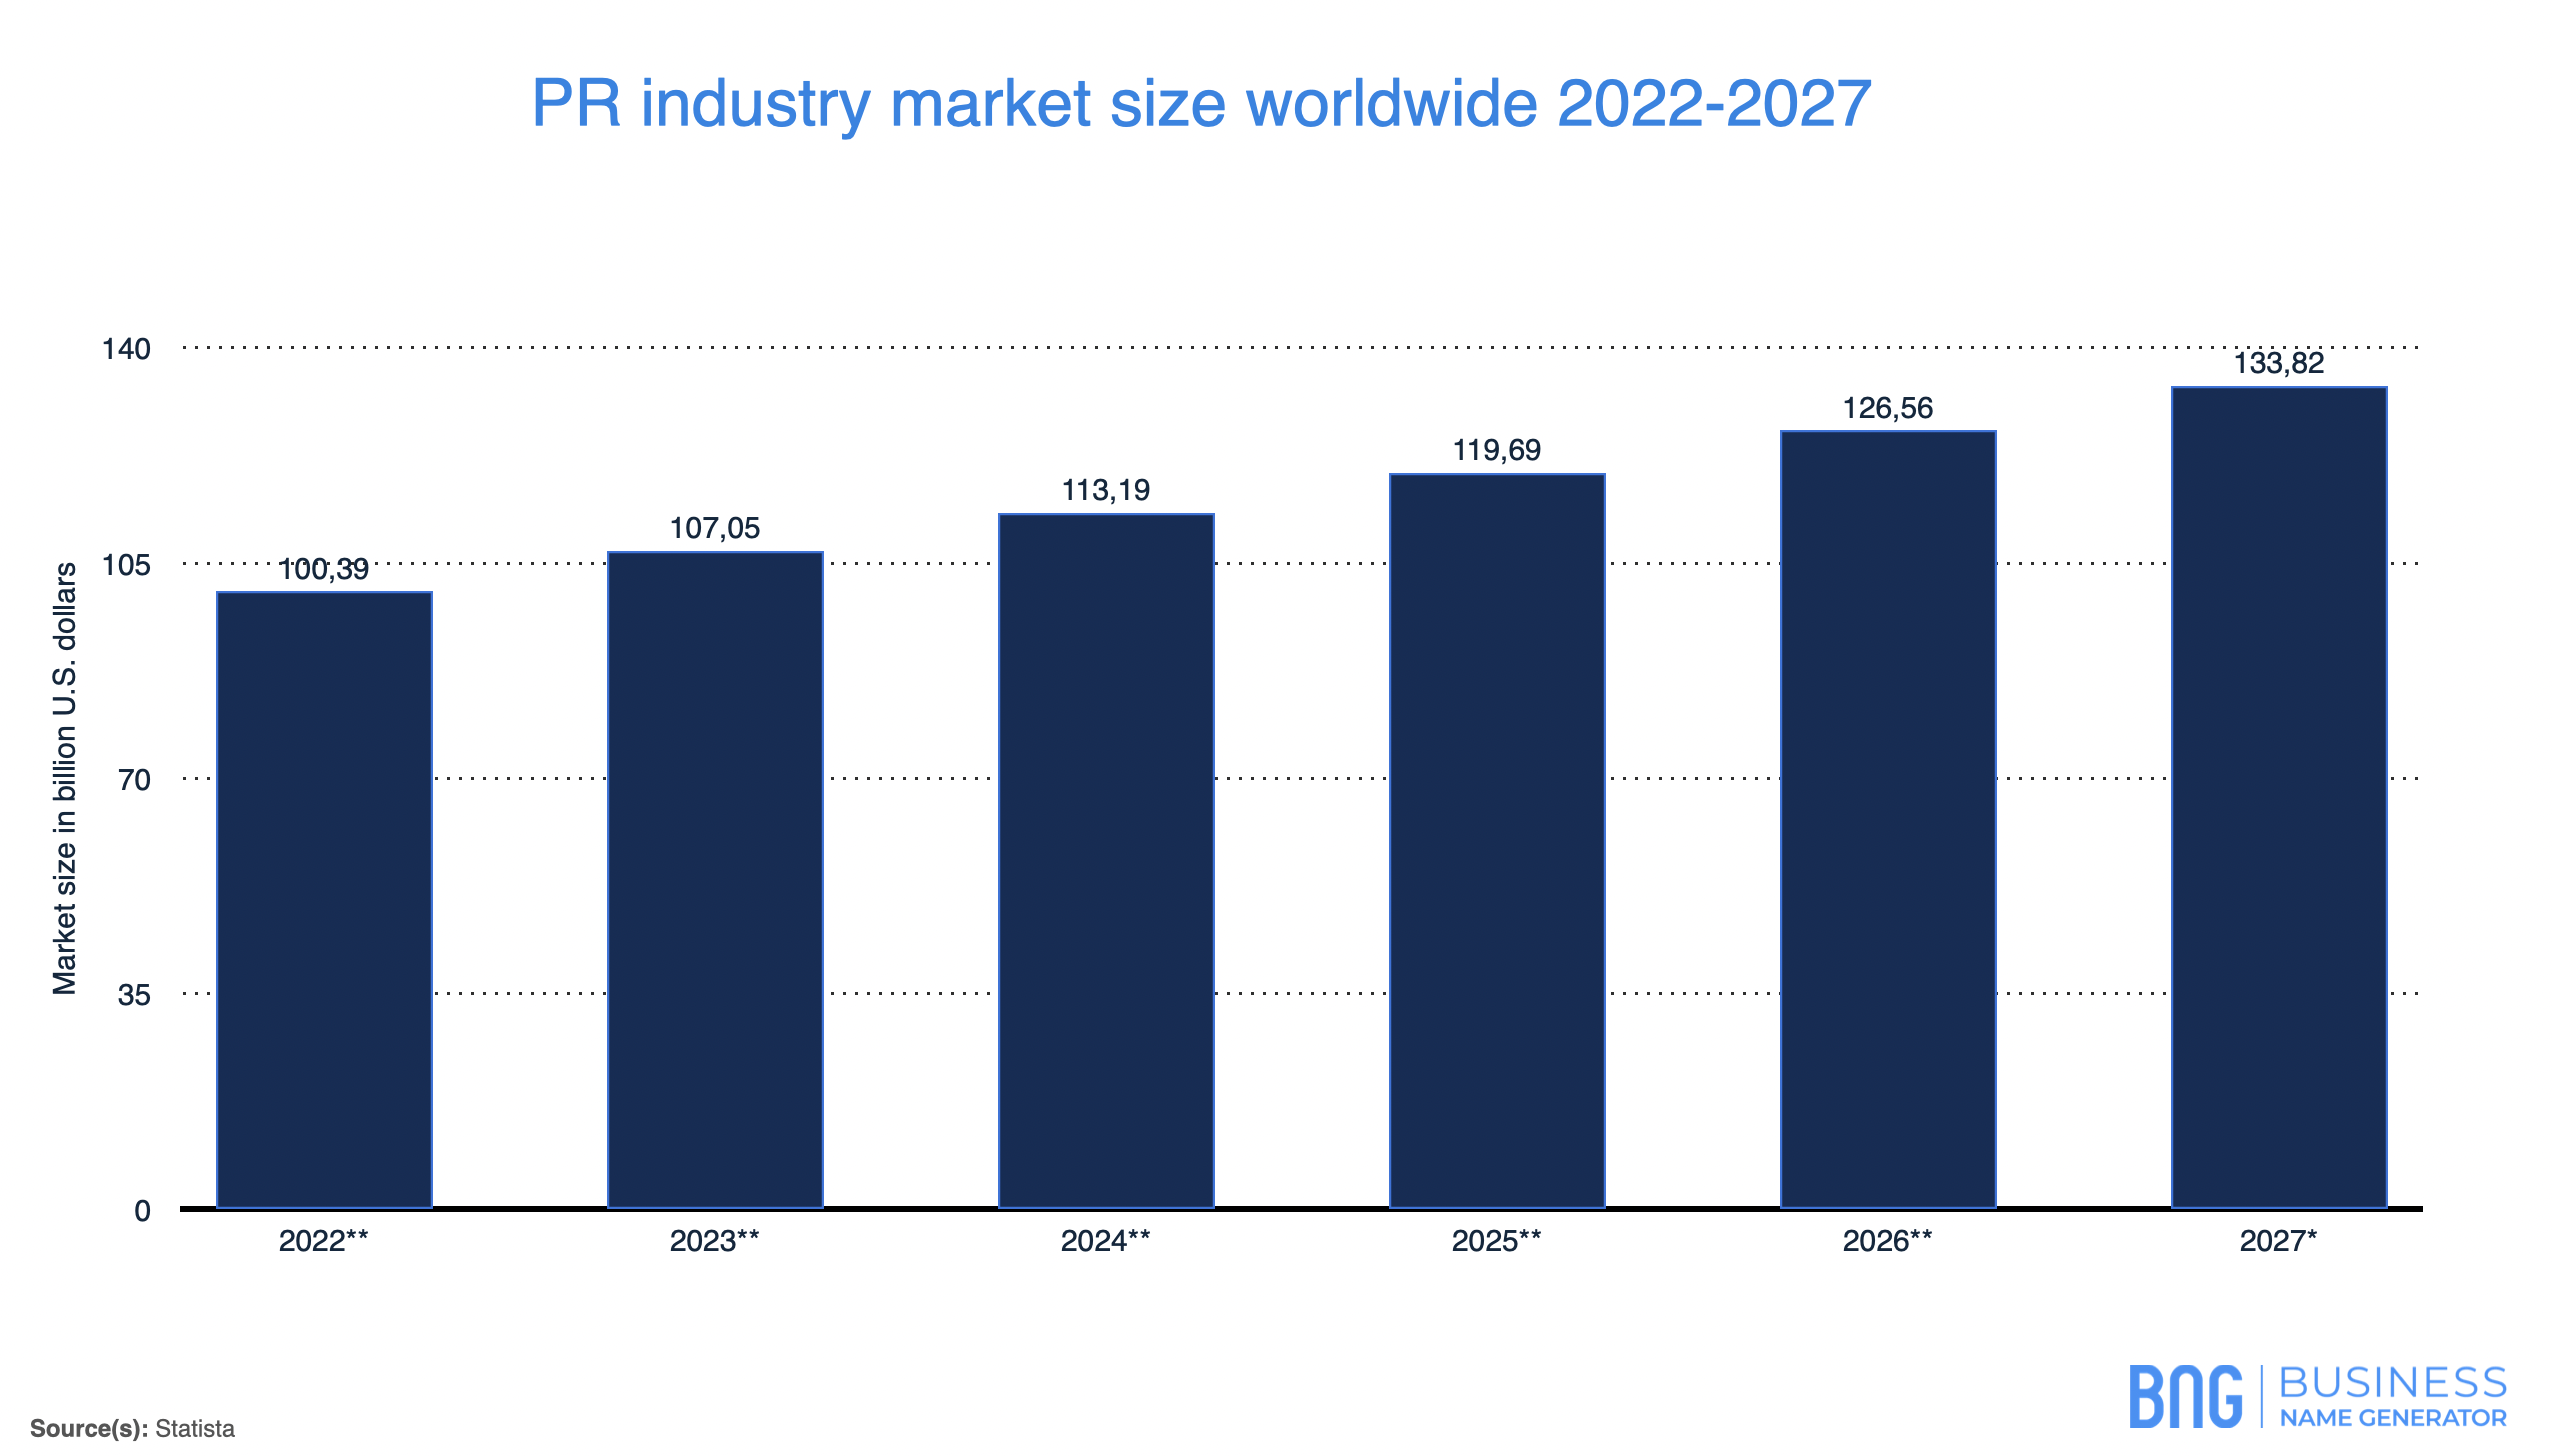 A graph of PR industry market size worldwide 2022 to 2027